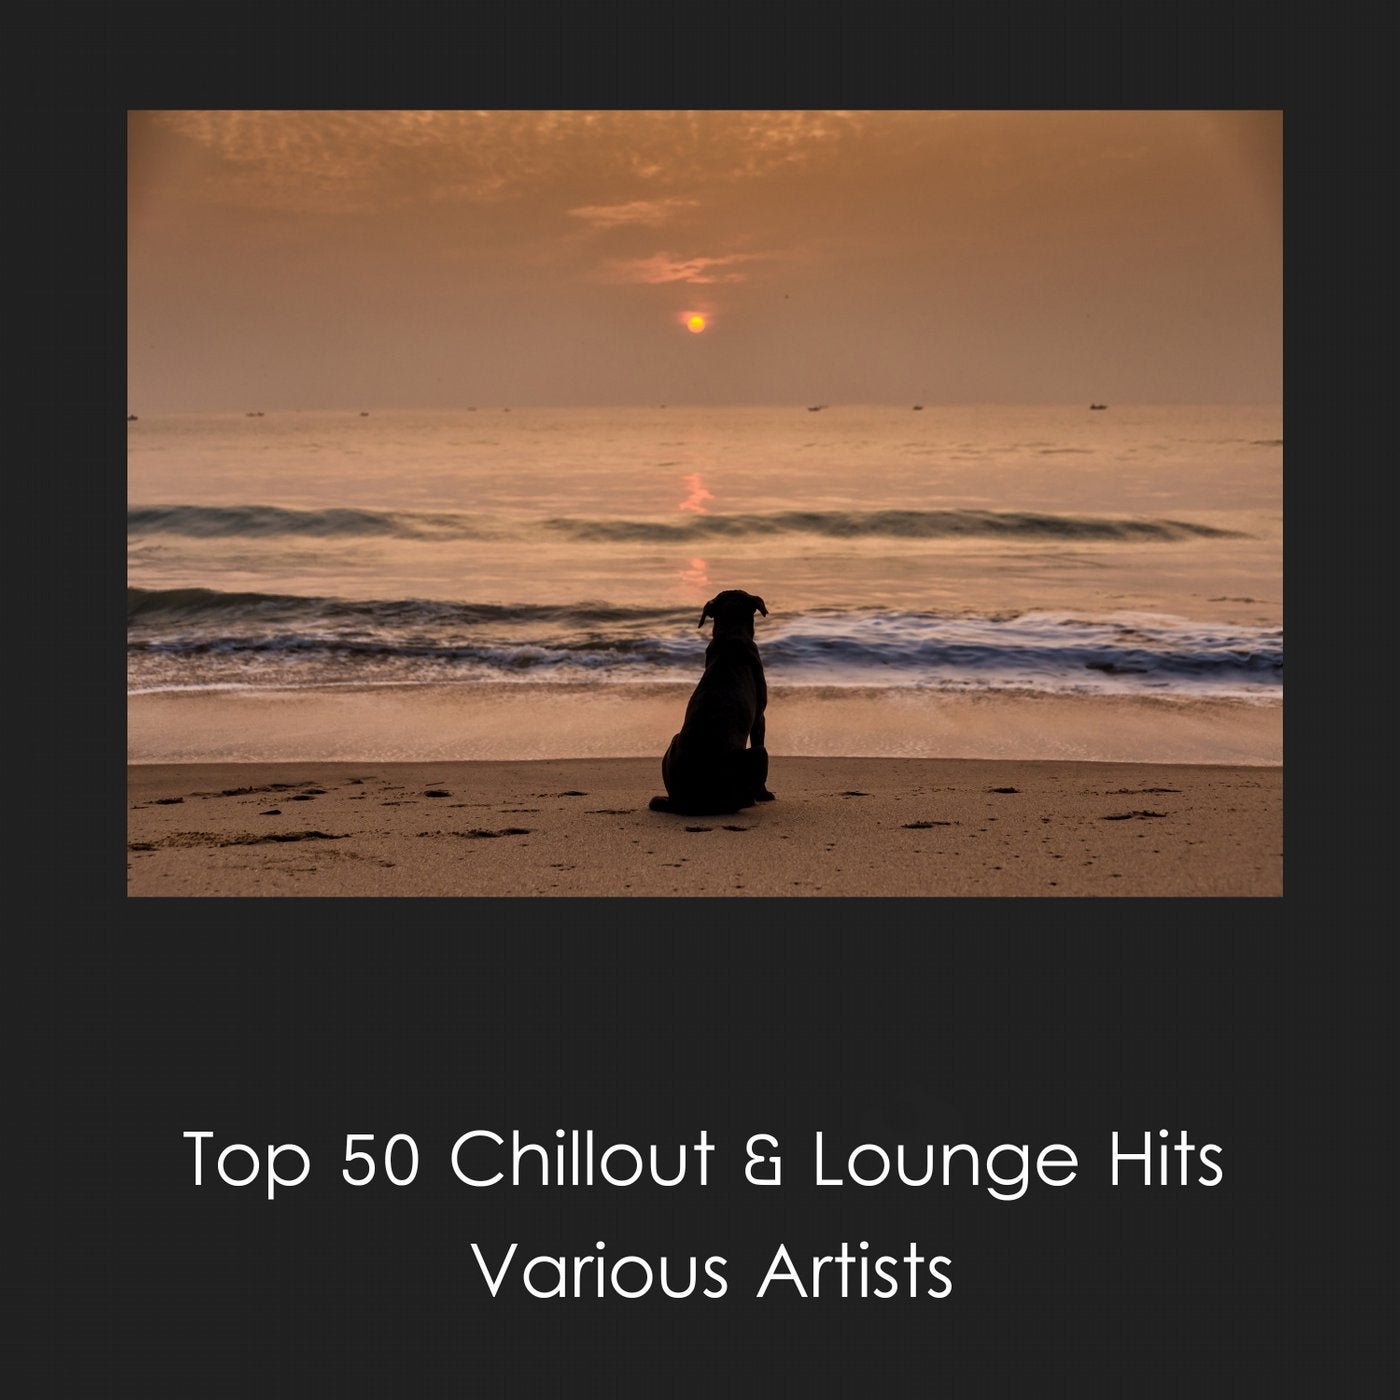 Top 50 Chillout & Lounge Hits